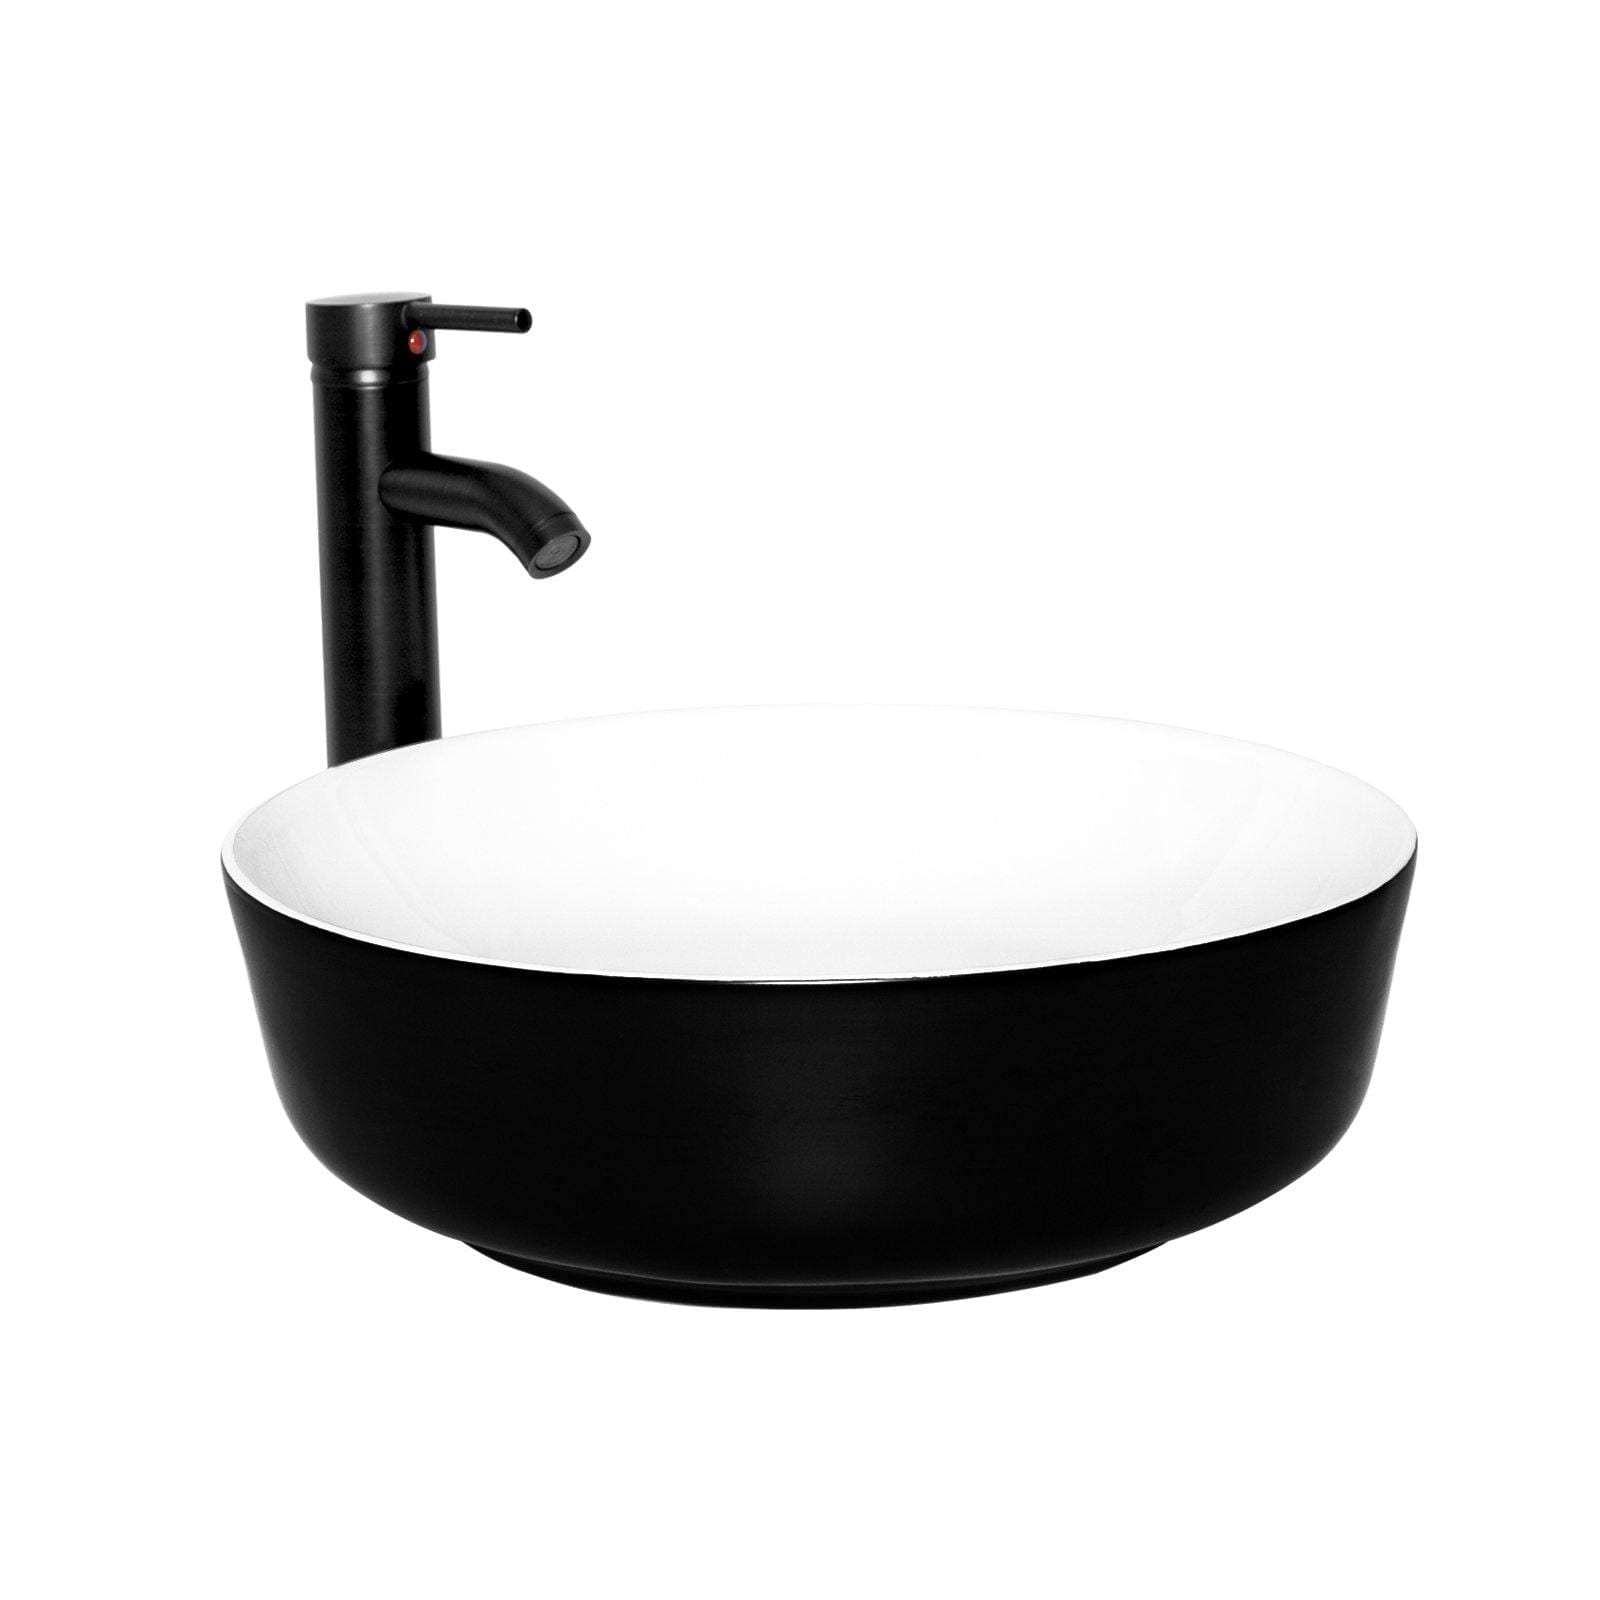 Elecwish Vessel Sinks Ceramic Bathroom Sink with Faucet Drain Combo,Round Black and White